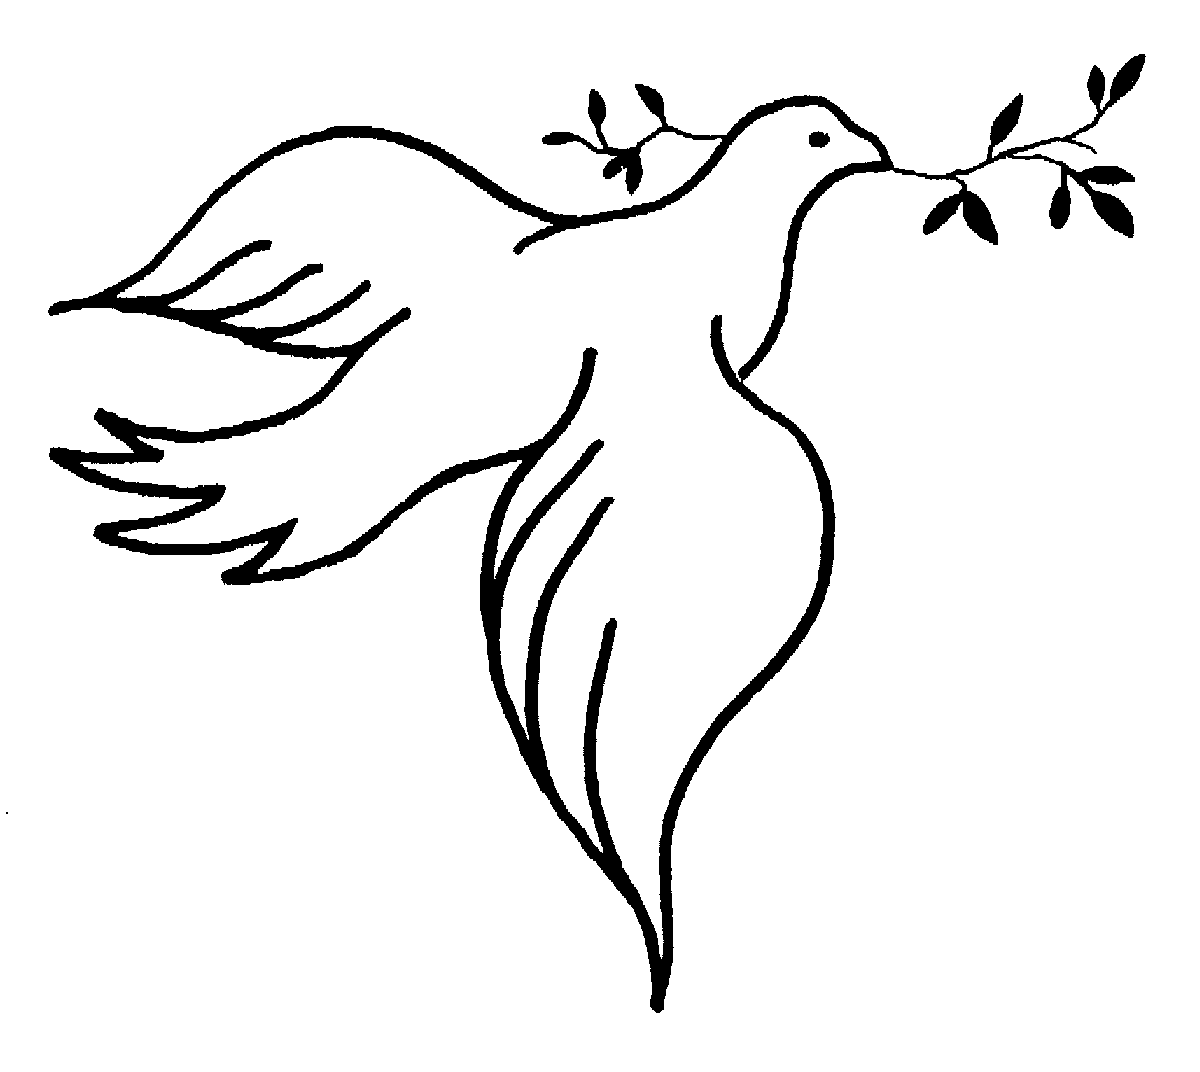 Dove Tattoos Designs, Ideas and Meaning | Tattoos For You